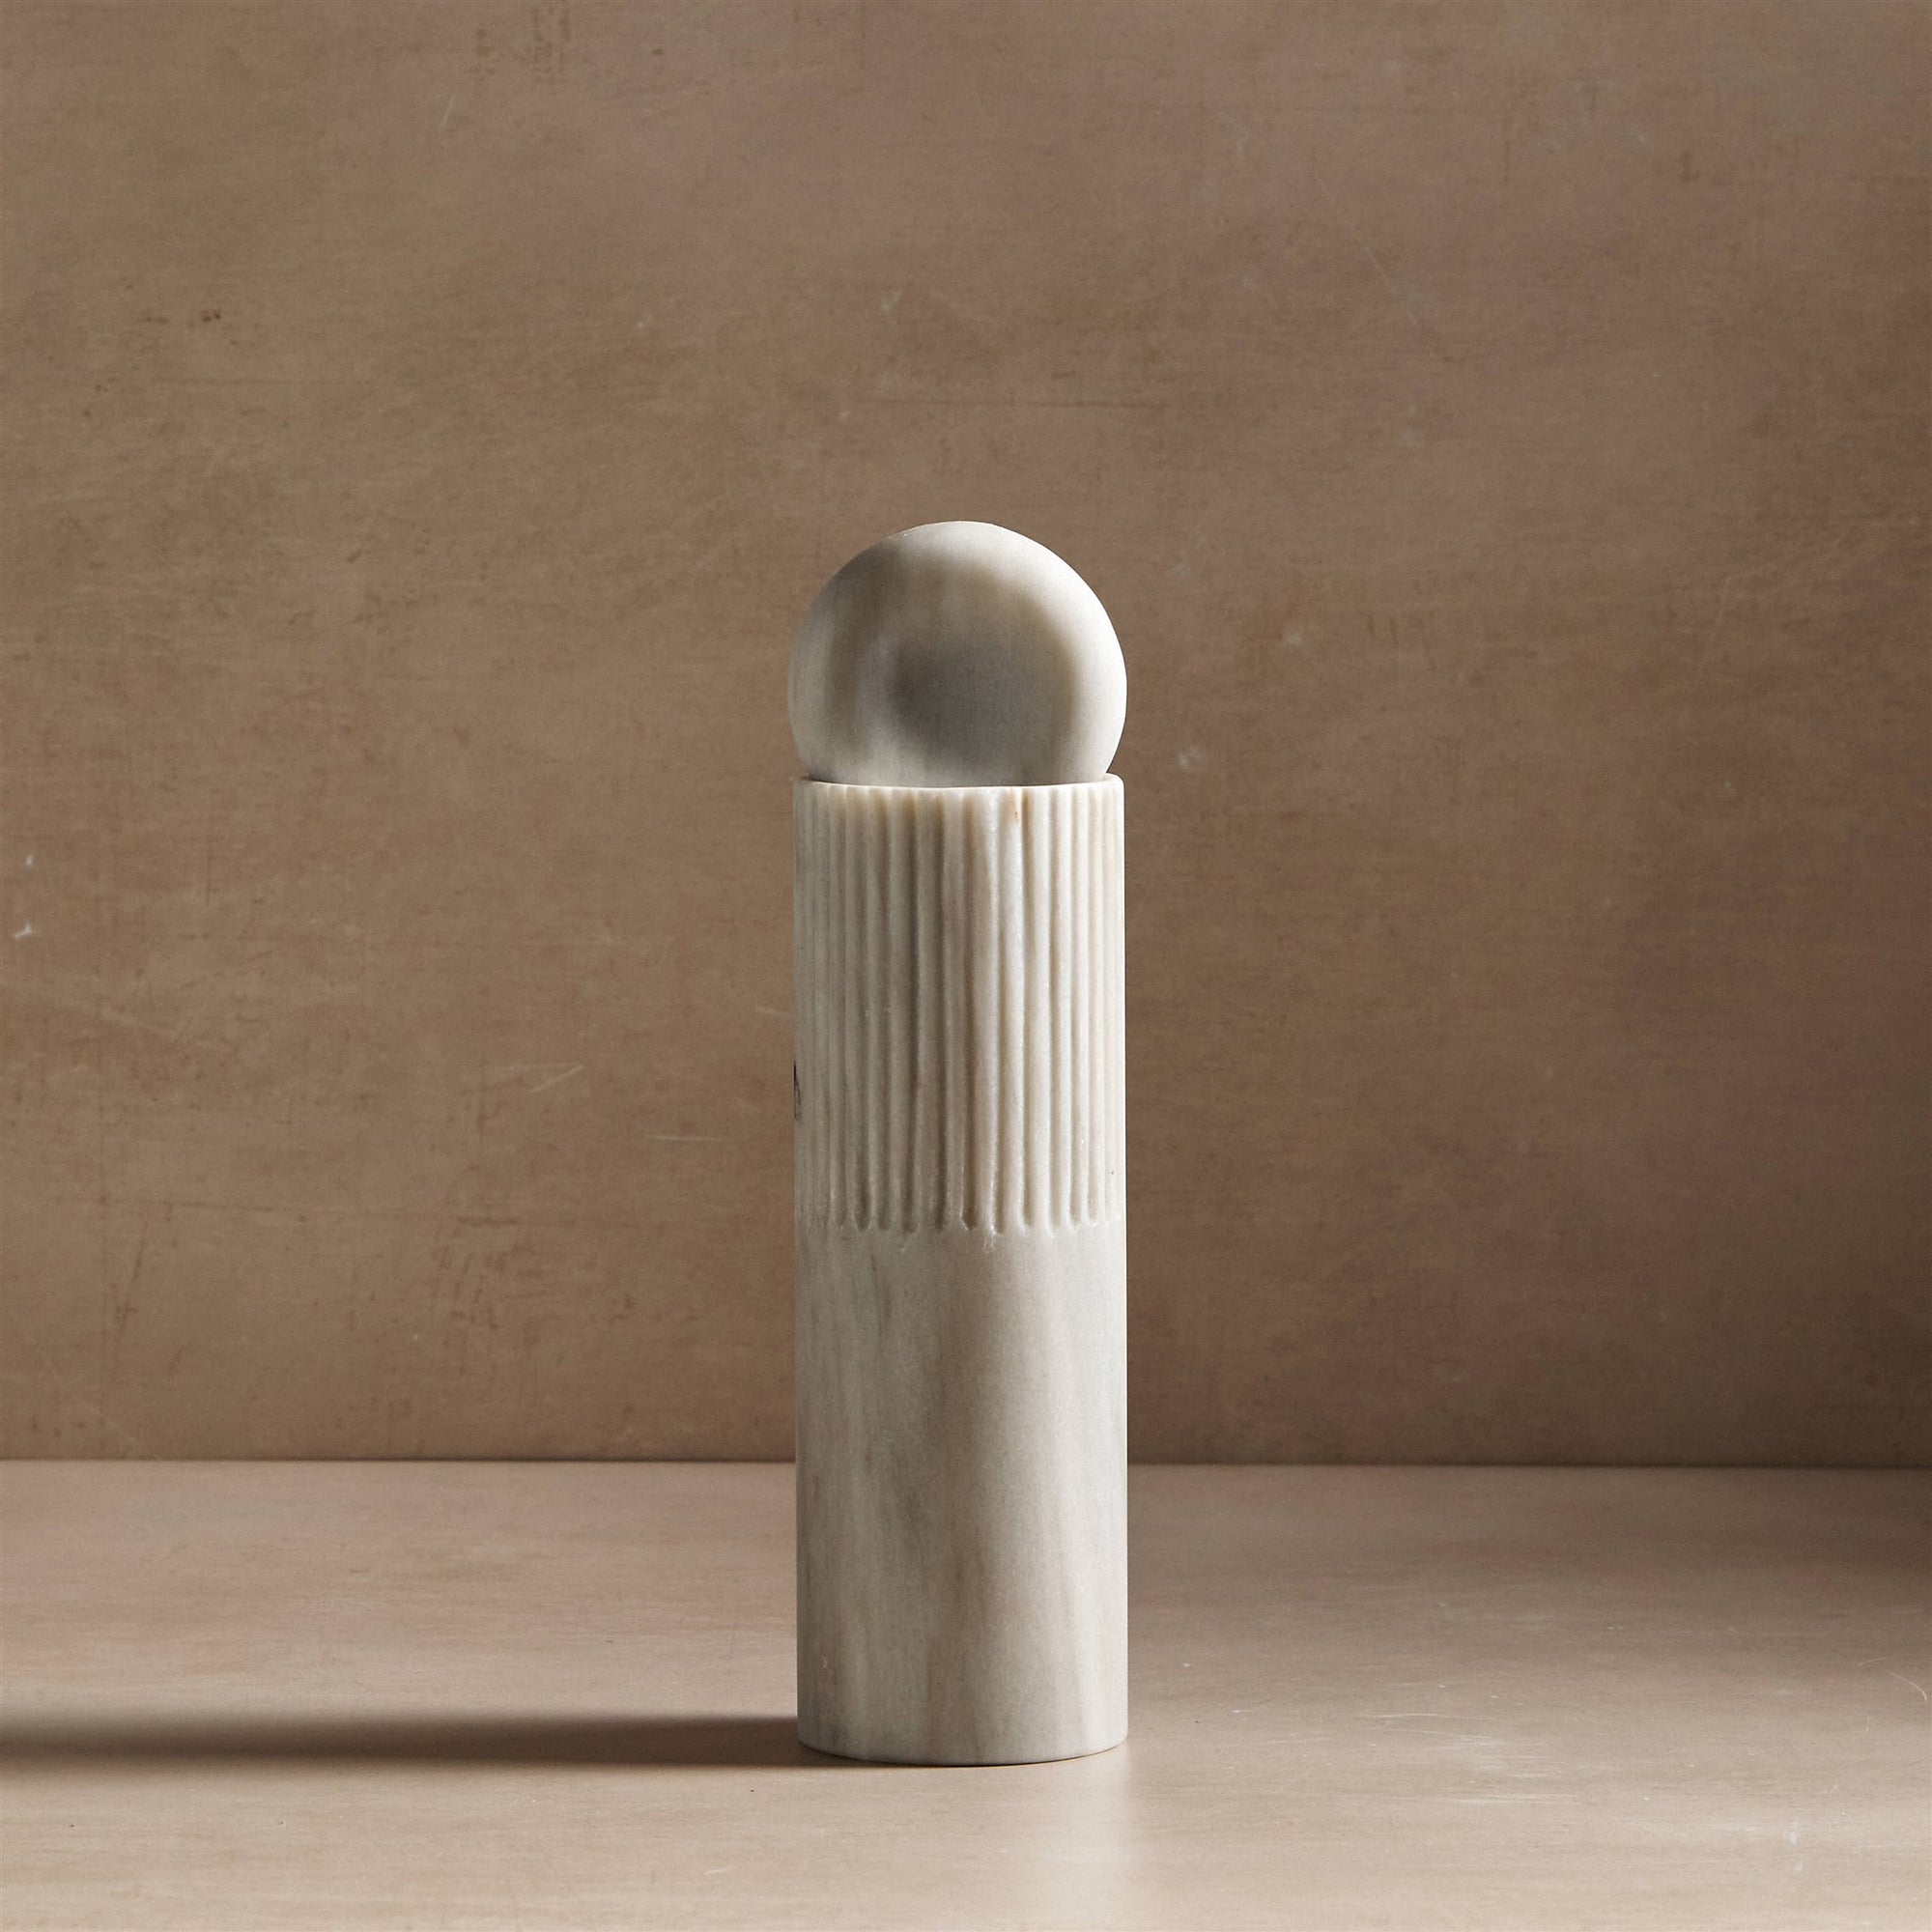 small totem sculpture made of white marble for decor